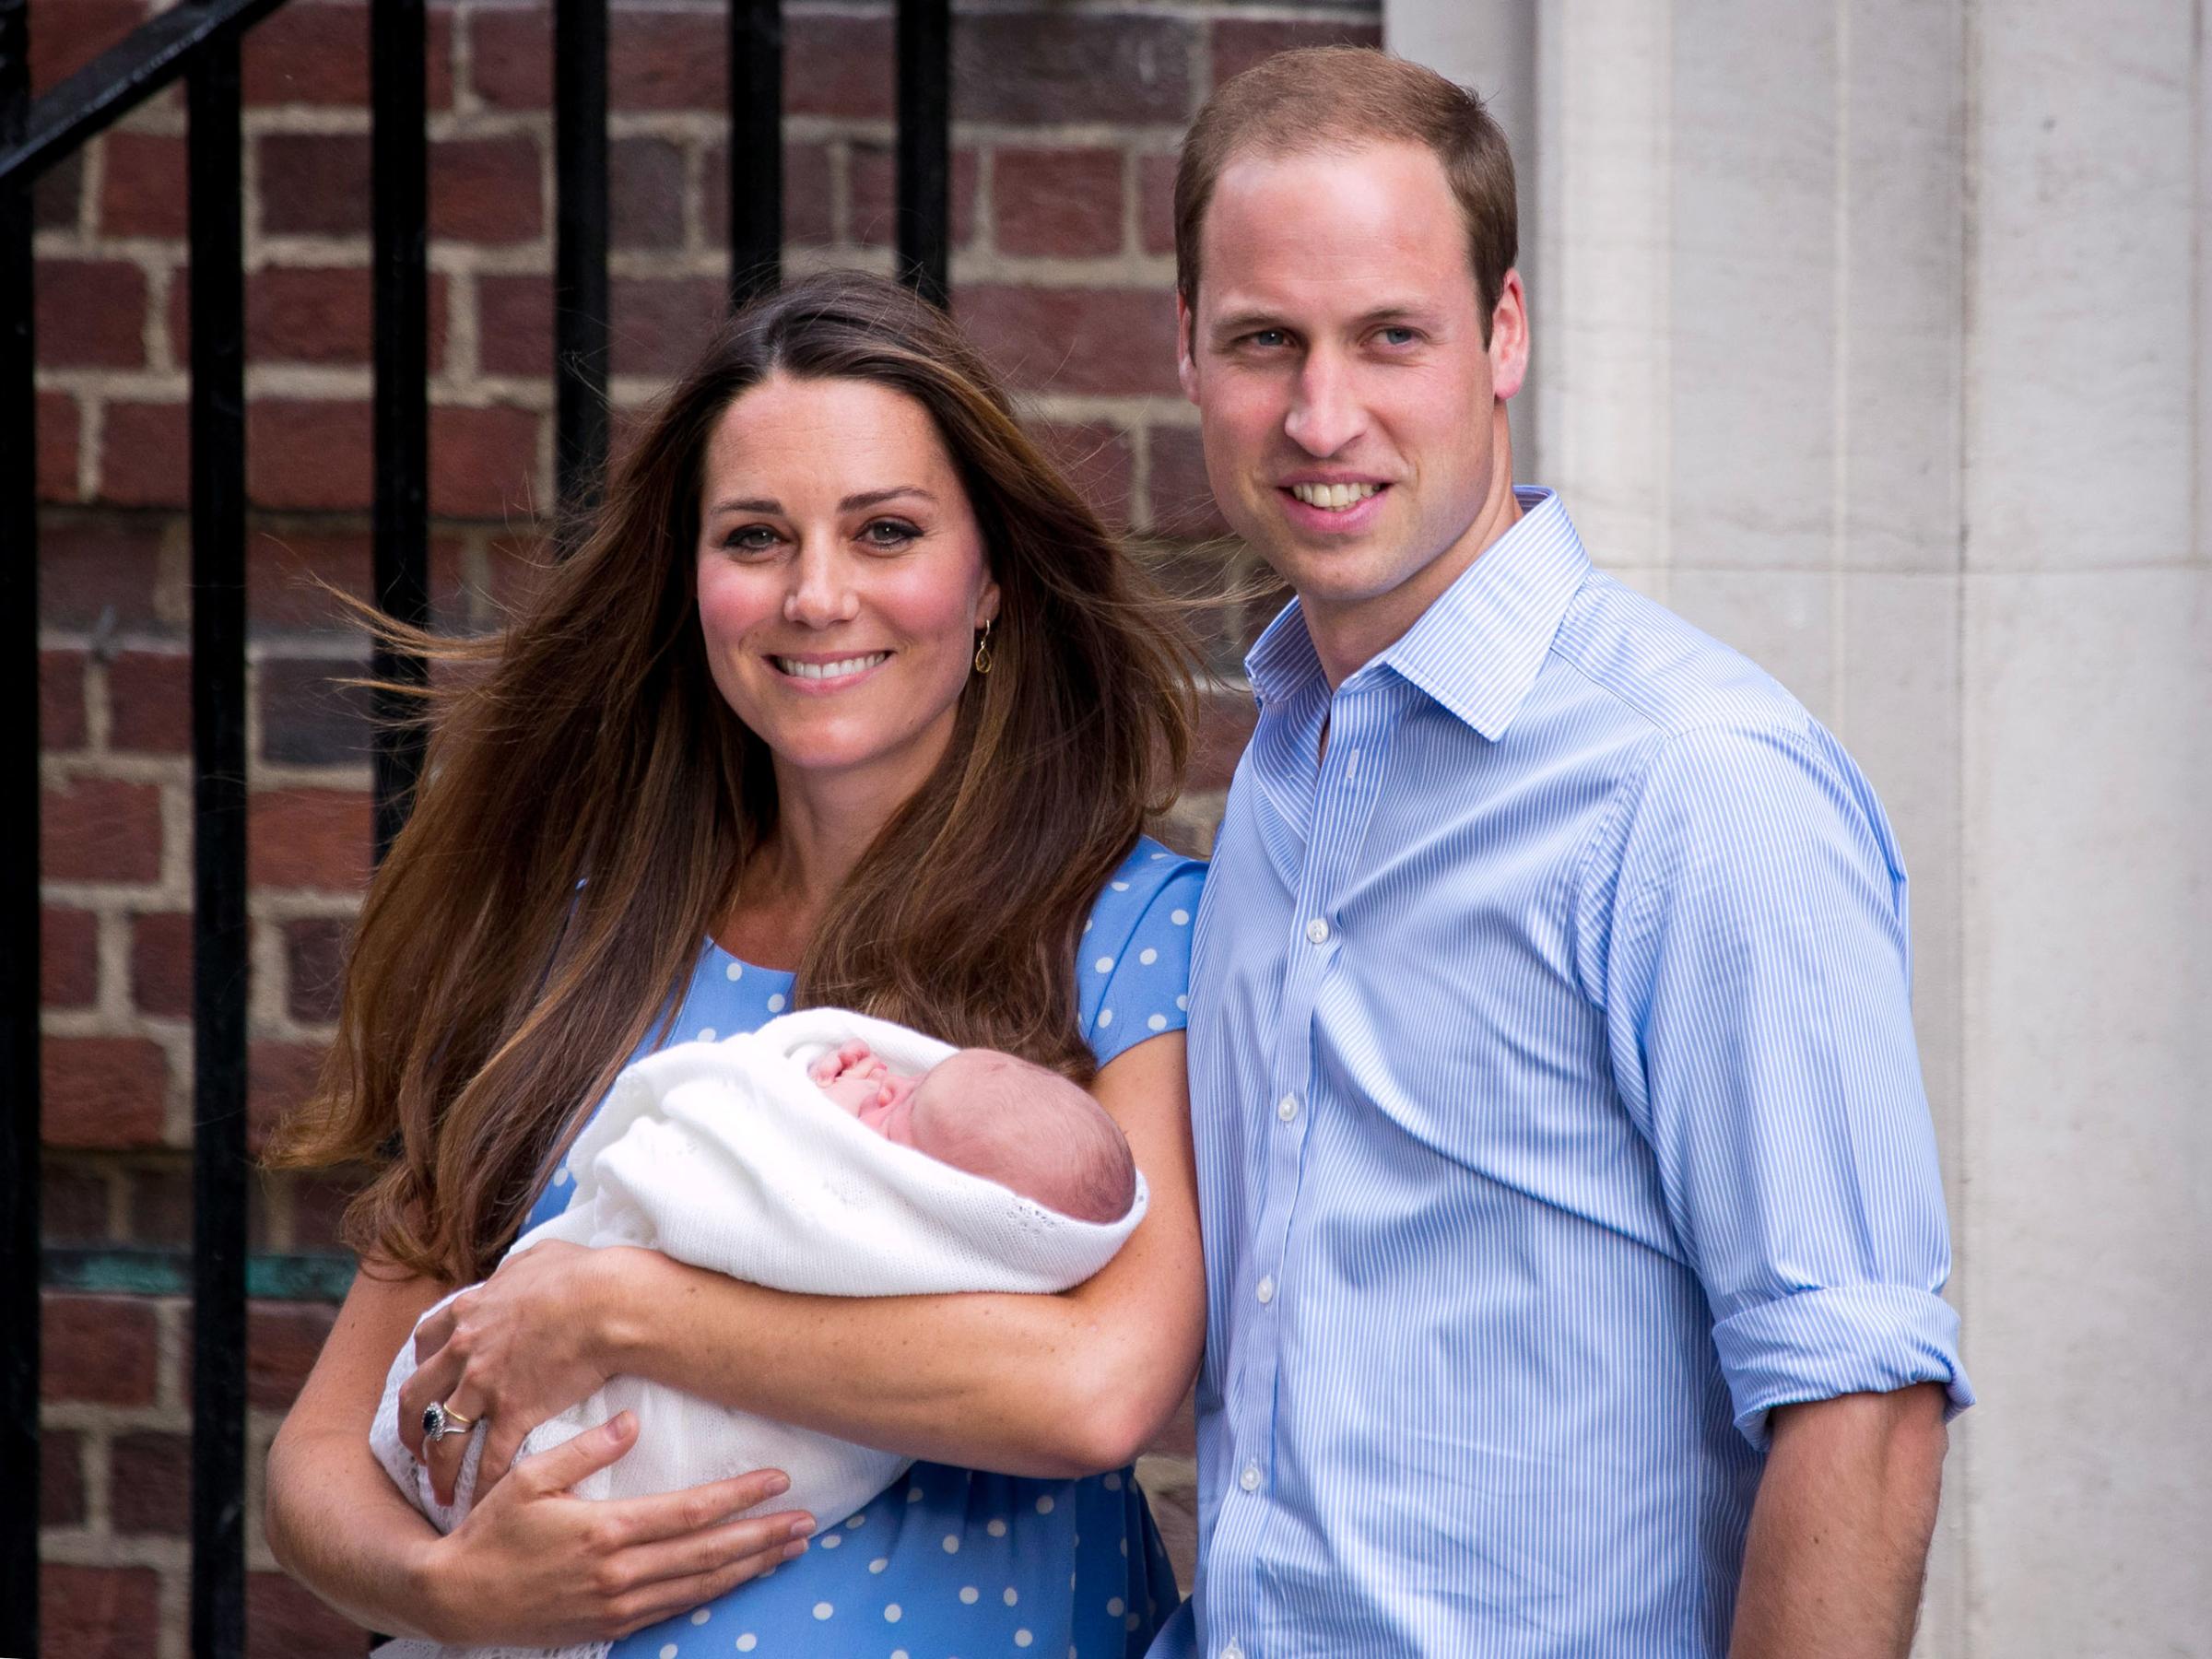 Prince William and Catherine with their newborn son, Prince George, depart the Lindo Wing of St Mary's Hospital in London on July 23, 2013.